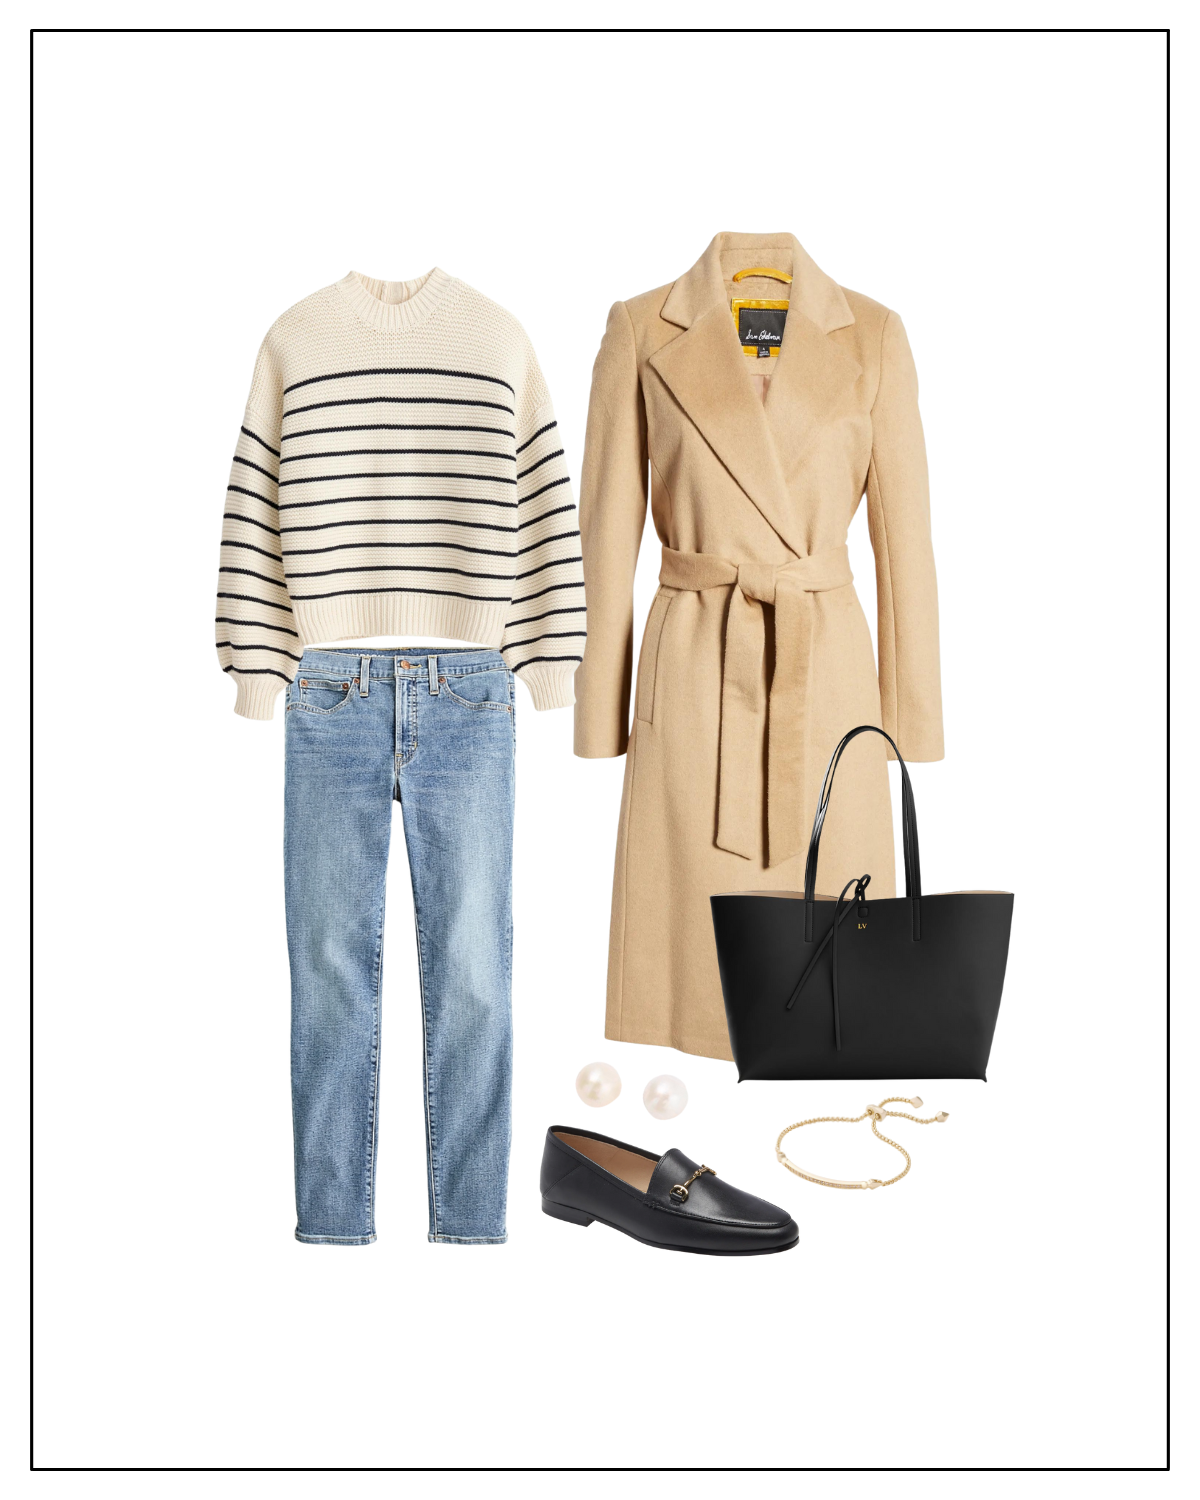 How to Style a Striped Sweater with black loafers